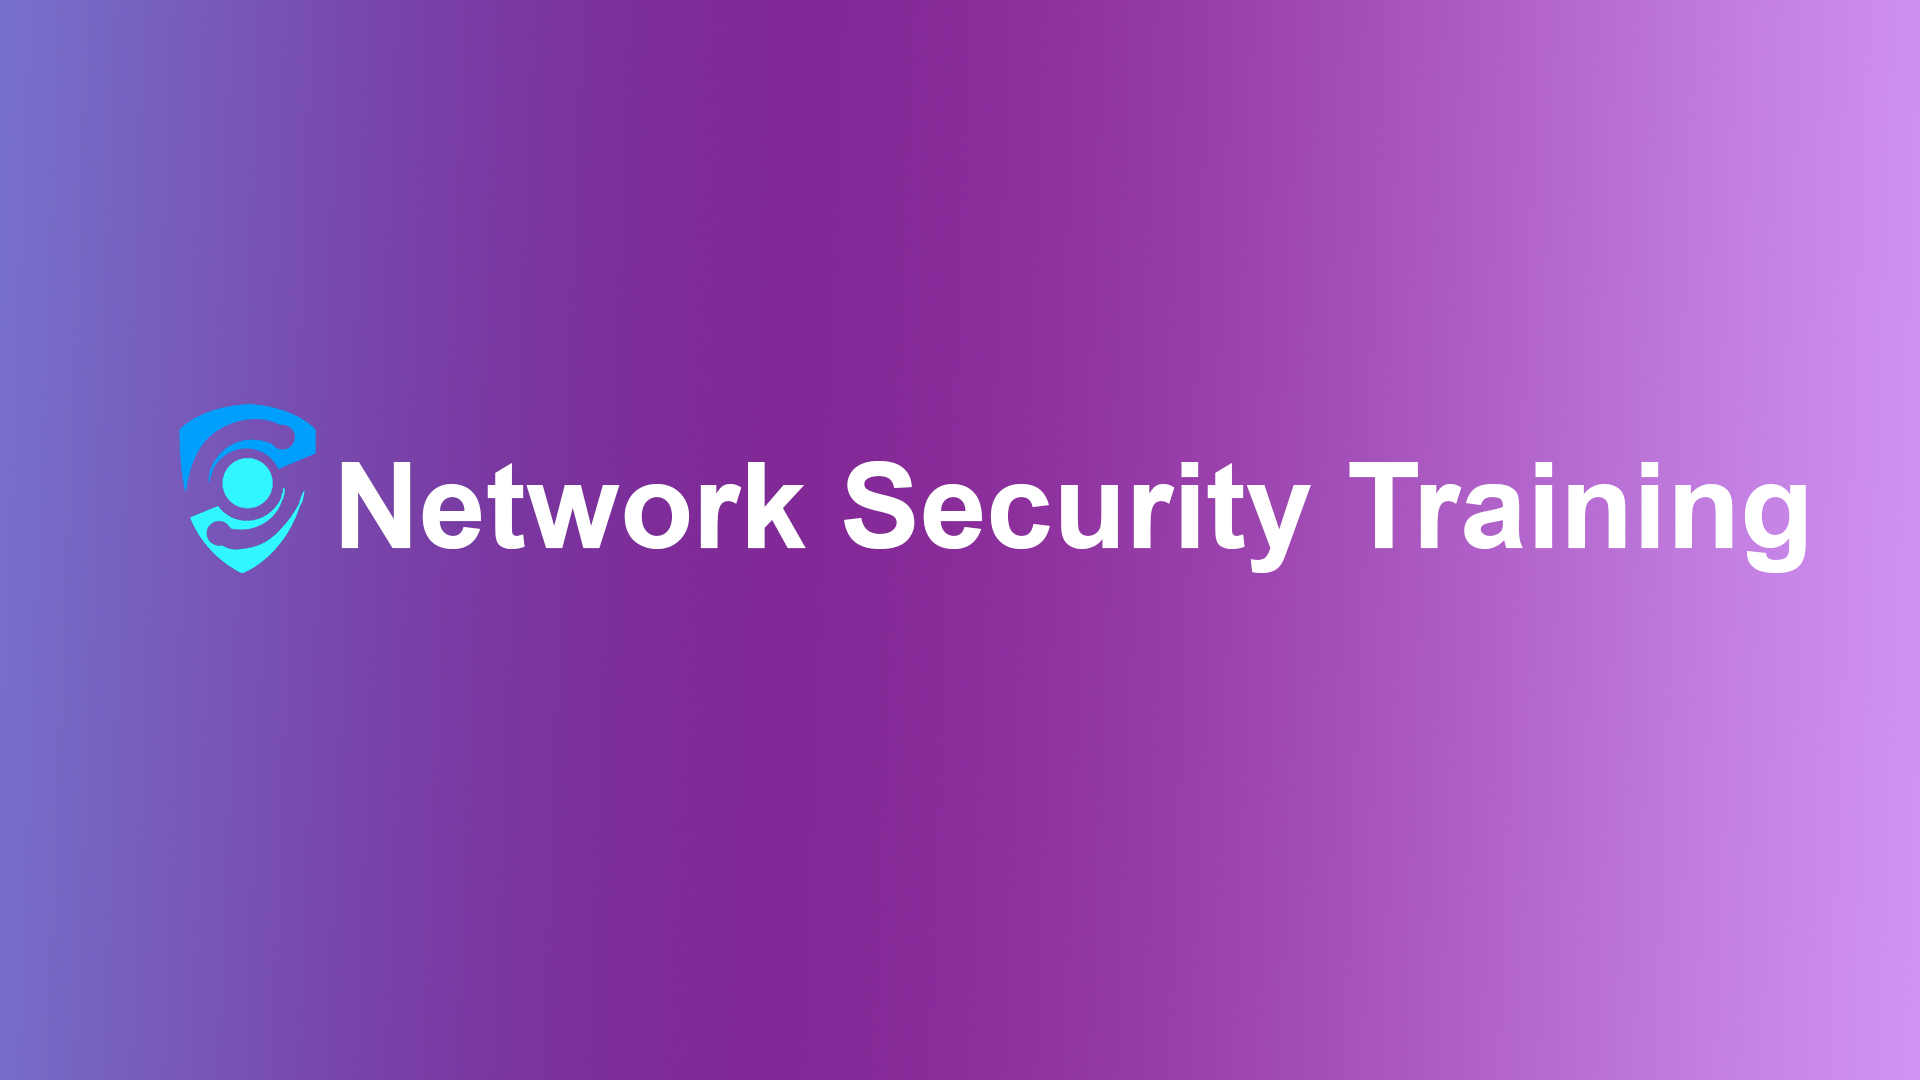 Network Security Training